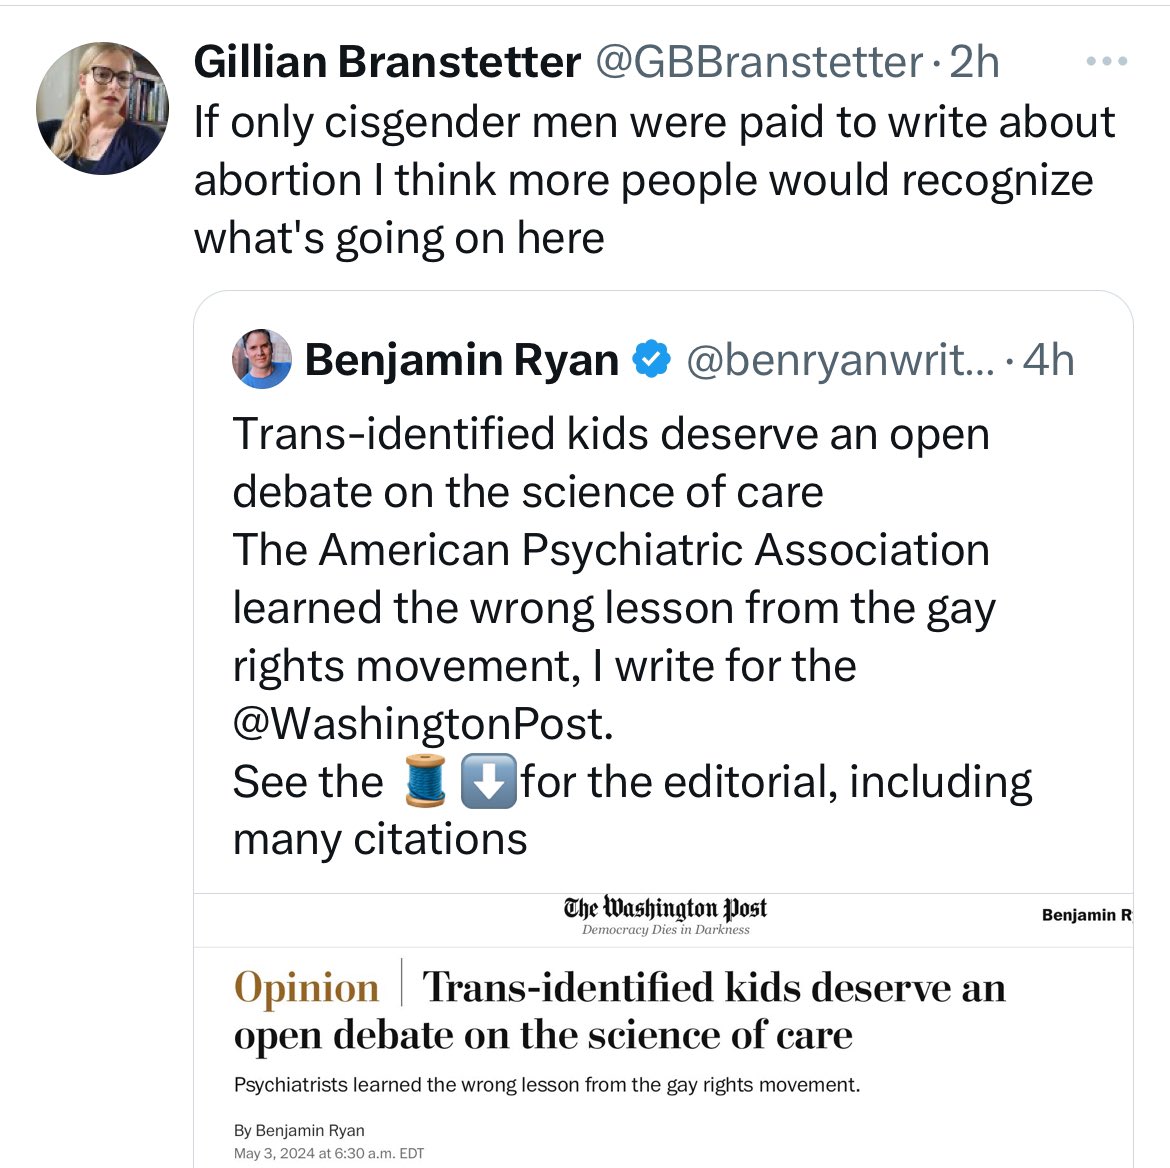 The @ACLU communications rep Gillian Branstetter @GBBranstetter sought to undermine my reporting on pediatric gender medicine recently with this claim, then quickly deleted it. But now she’s back with it. It’s remarkable the ACLU seeks to stifle my speech with such derision.